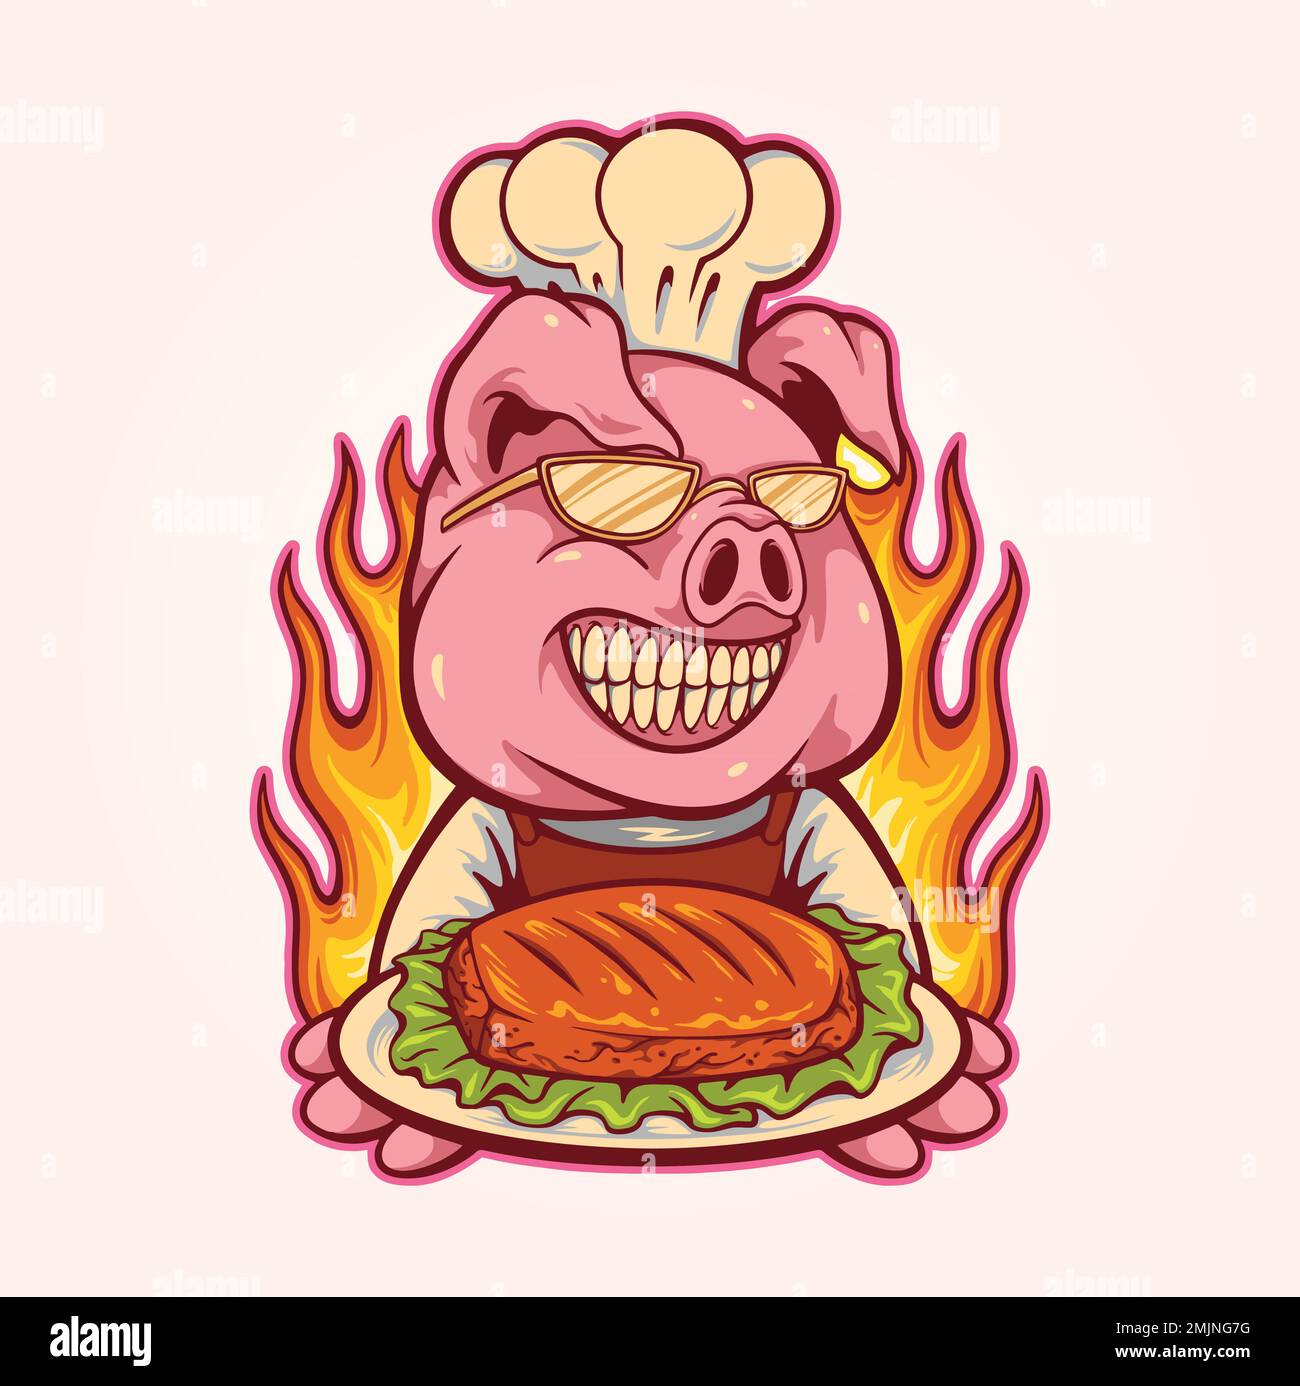 Scary hog chef meat bbq logo illustration vector illustrations for your work logo, merchandise t-shirt, stickers and label designs, poster Stock Vector